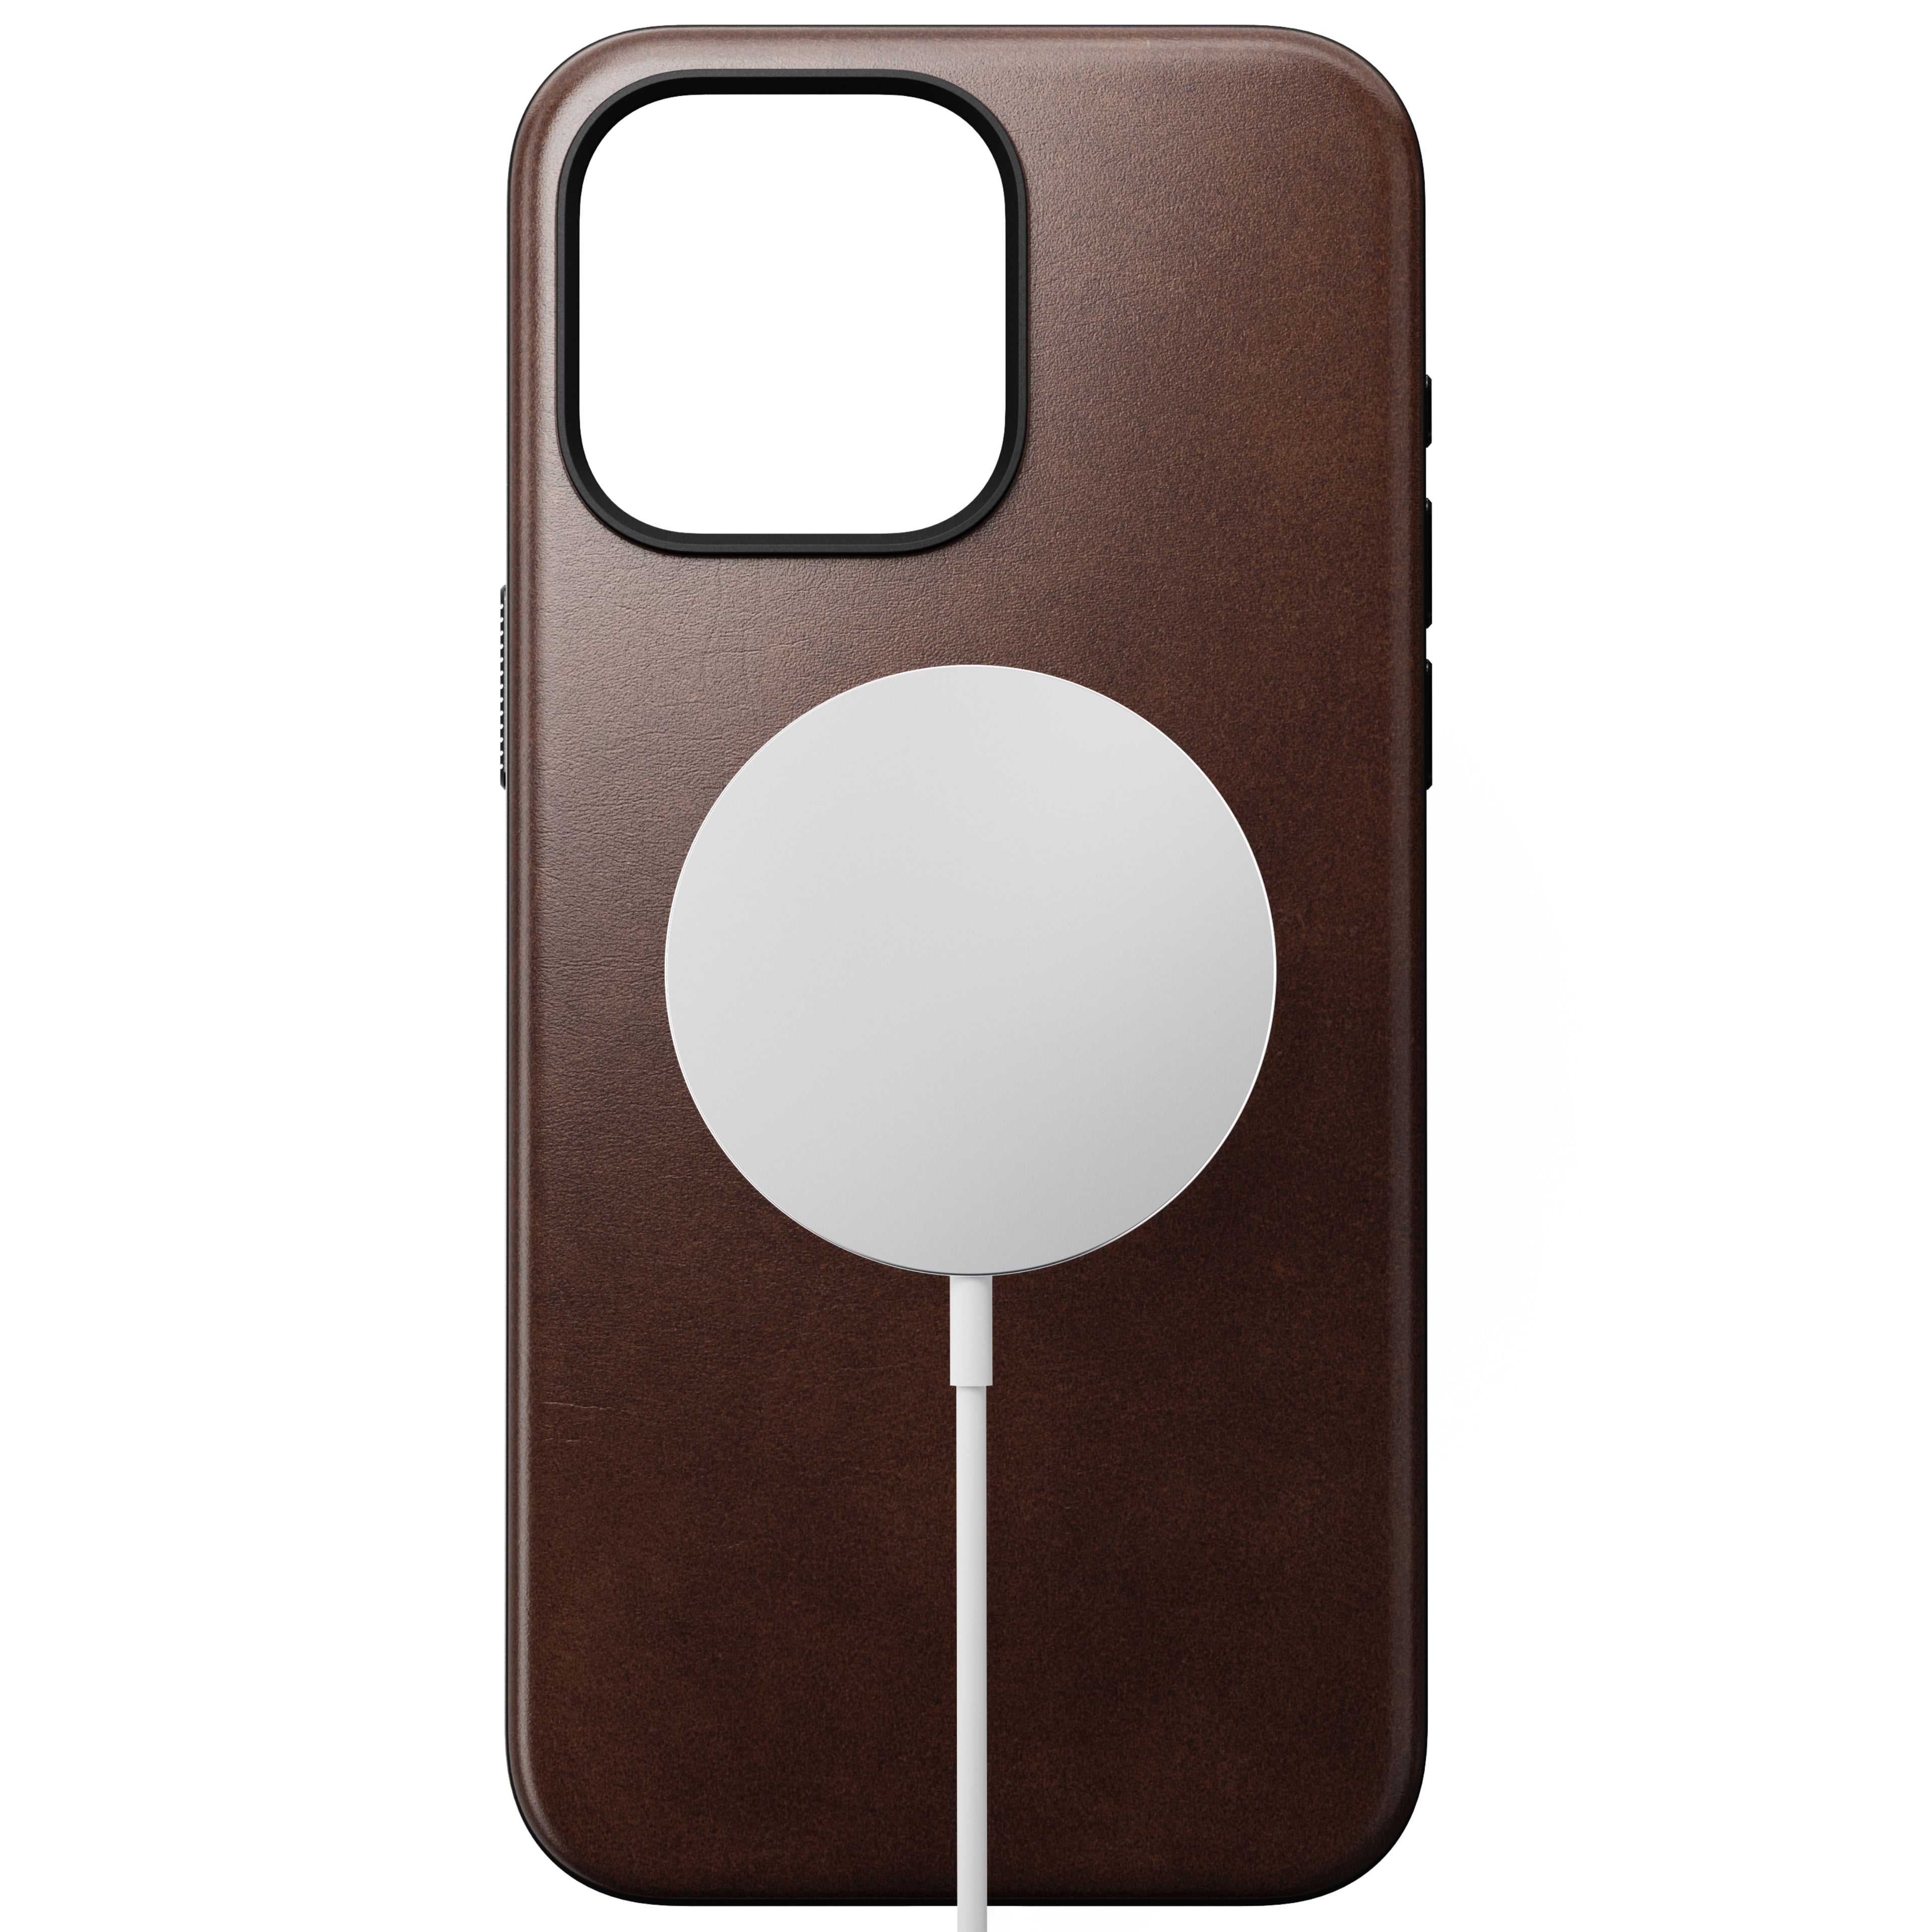 Modern Horween Leather Case for iPhone 15 Series